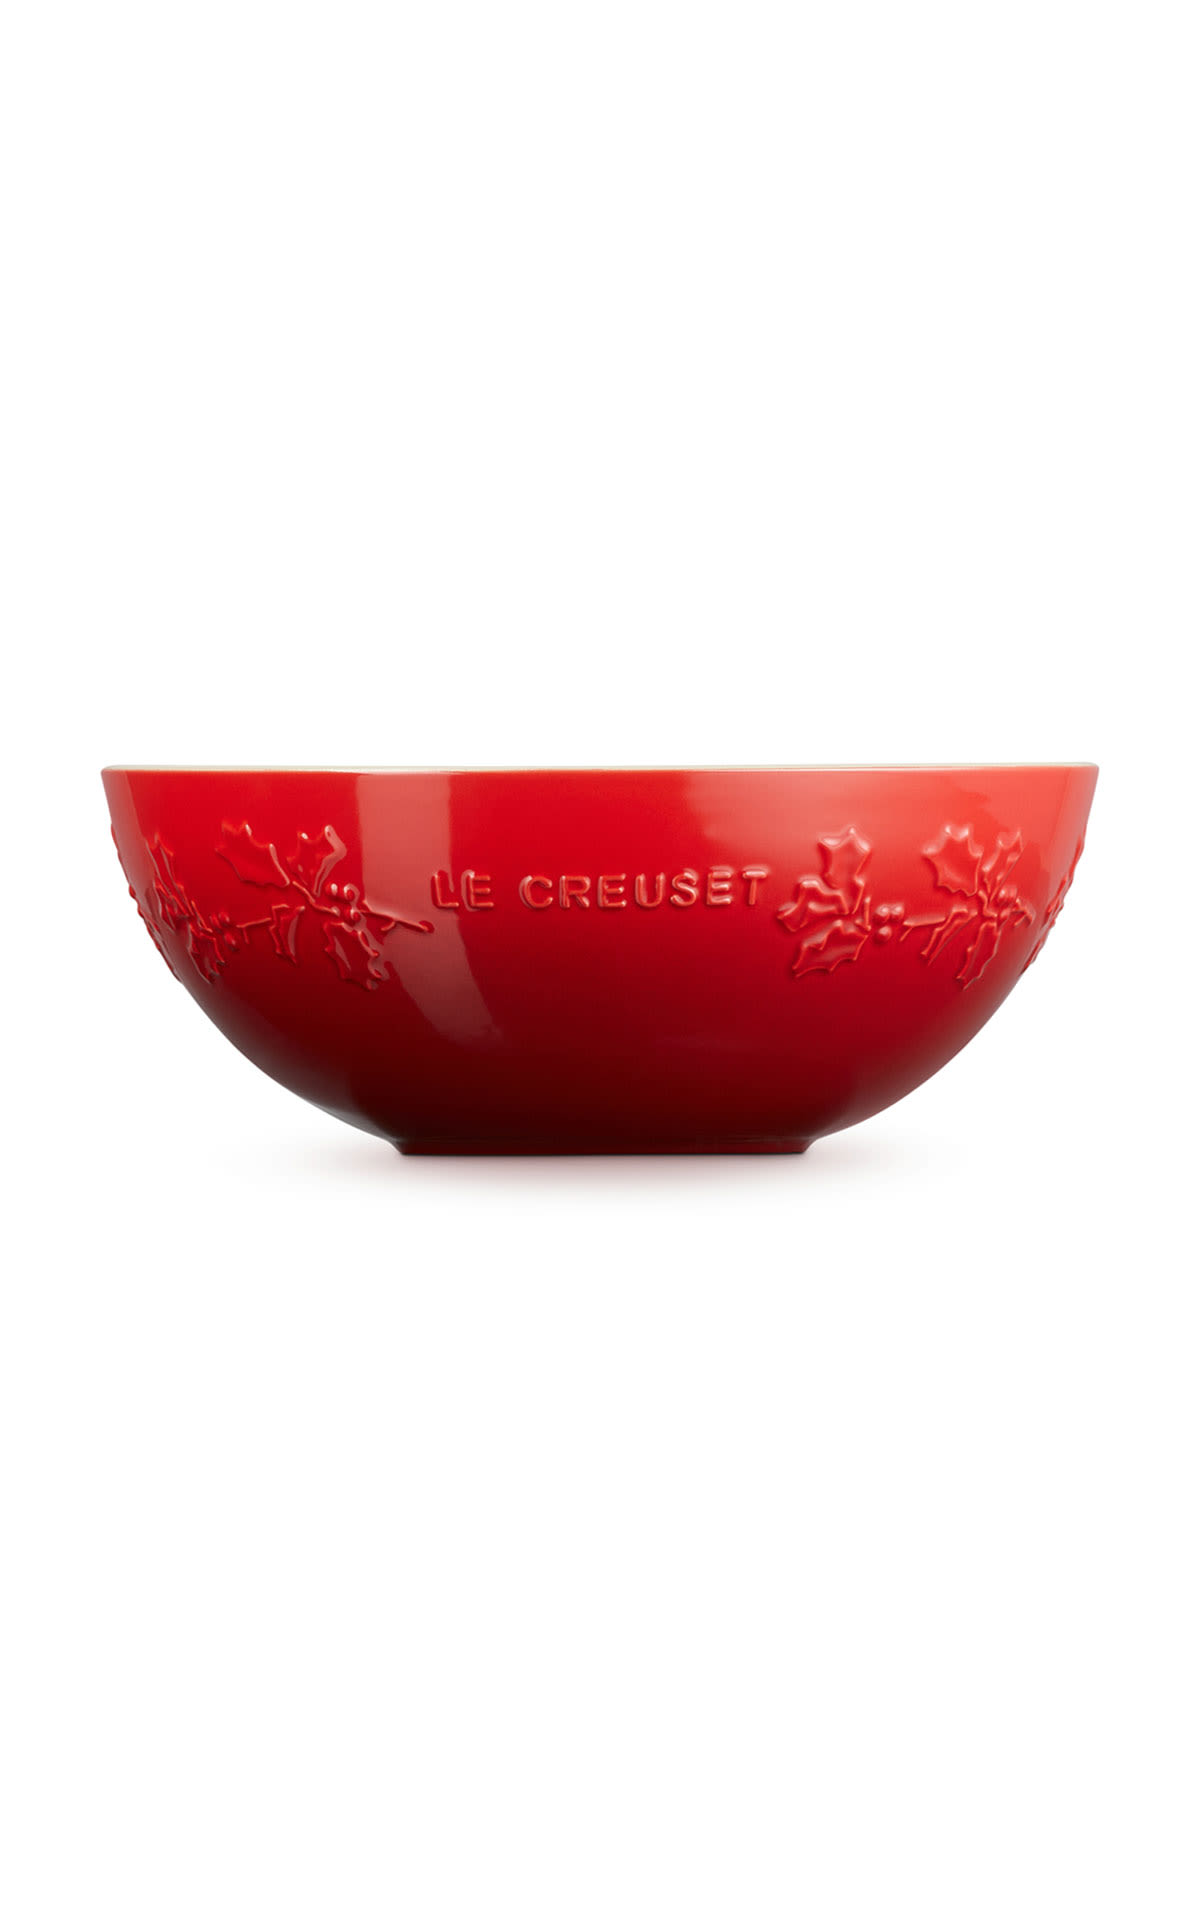 Le Creuset Holly multi bowl stoneware 25cm cerise from Bicester Village